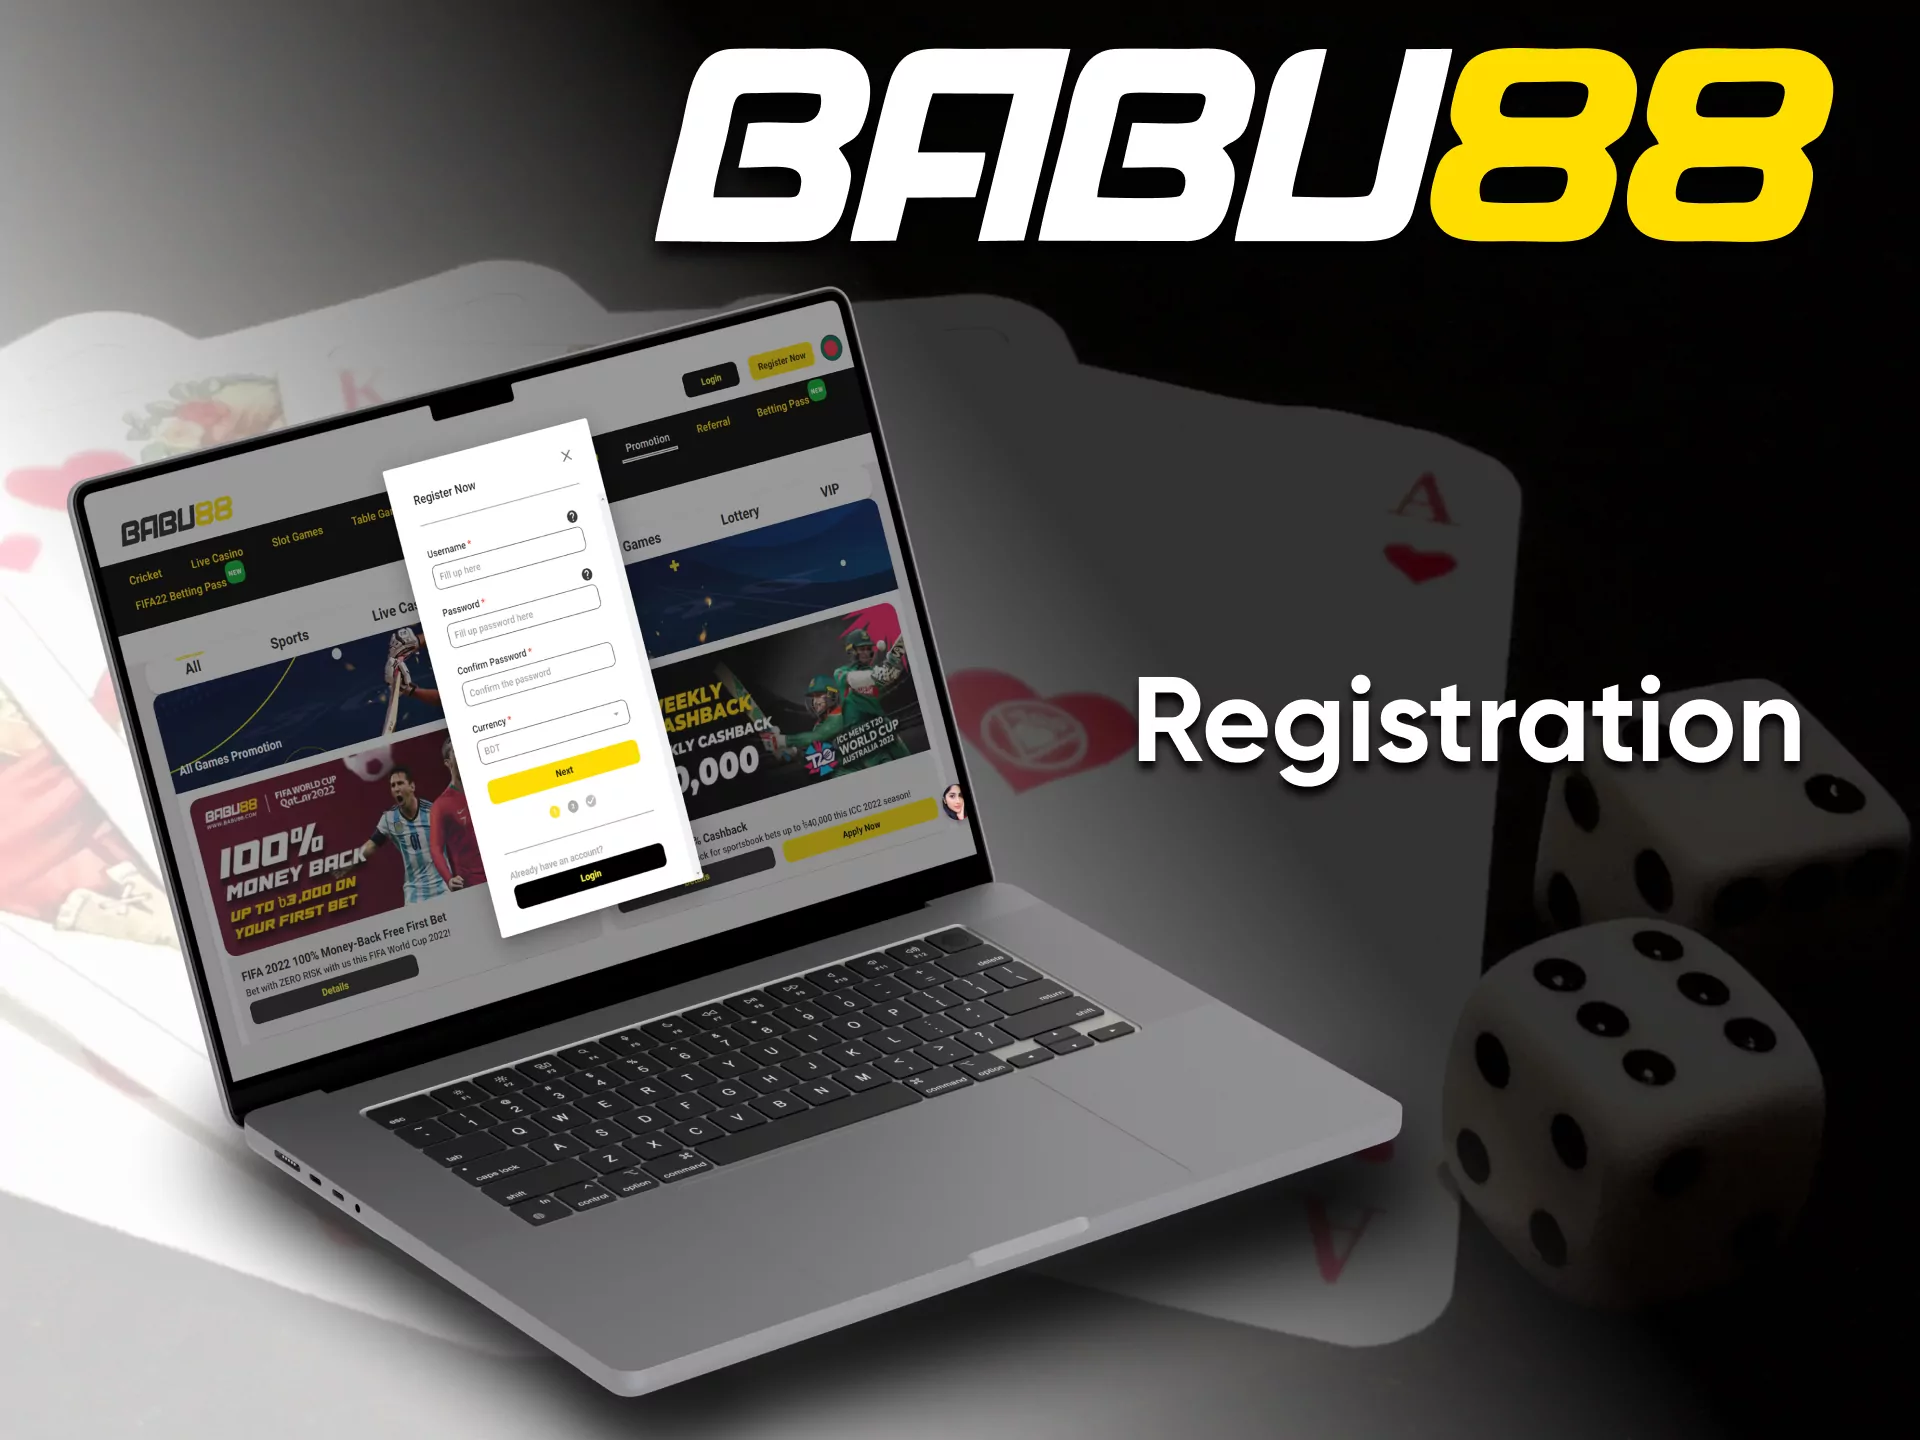 Input your information to create an account for the Babu88.